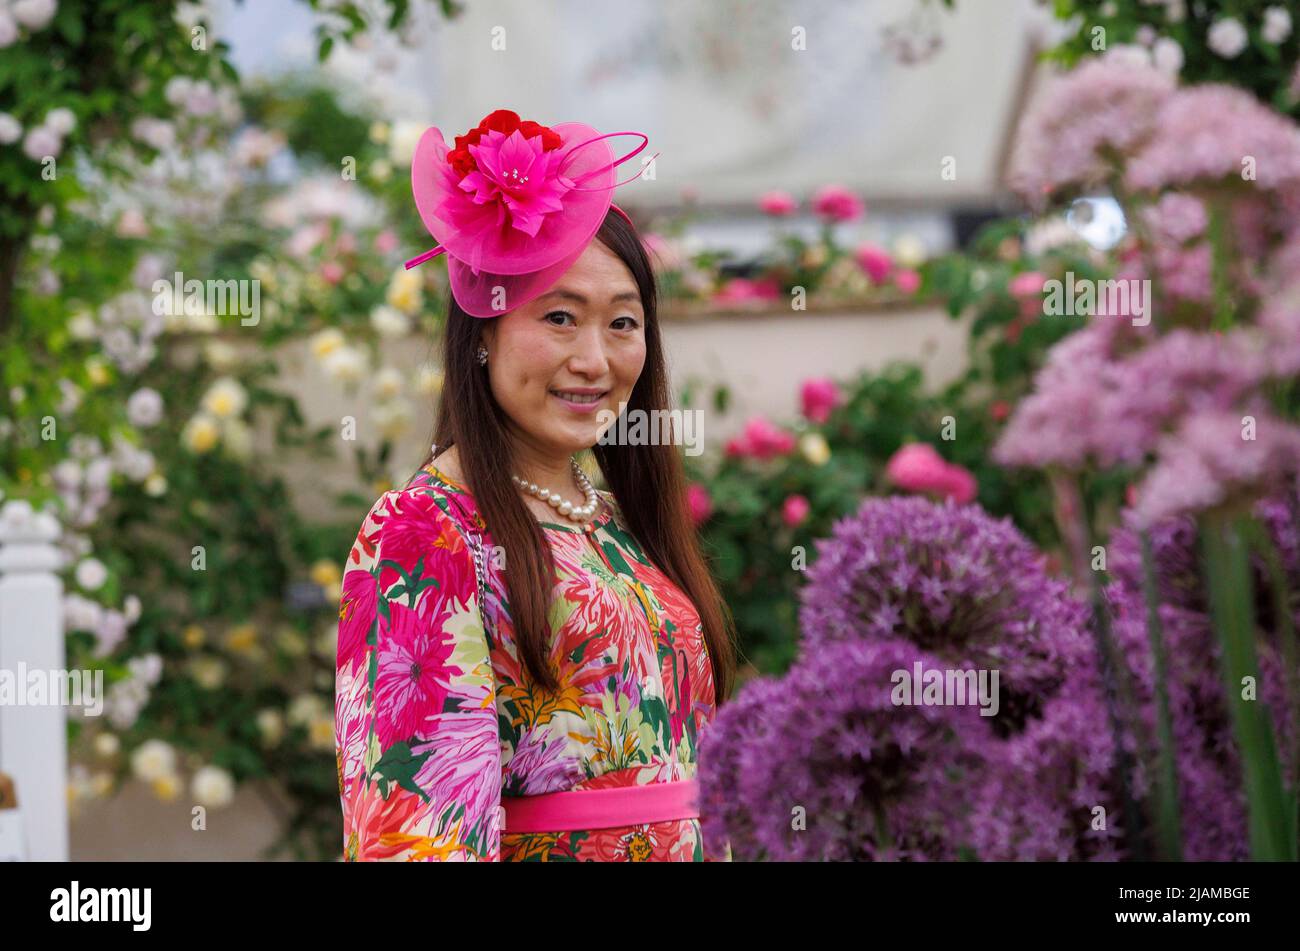 A fashionable Lady with a pink hat visits the RHS Chelsea Flower Show, amongst the Aliums and roses. Stock Photo